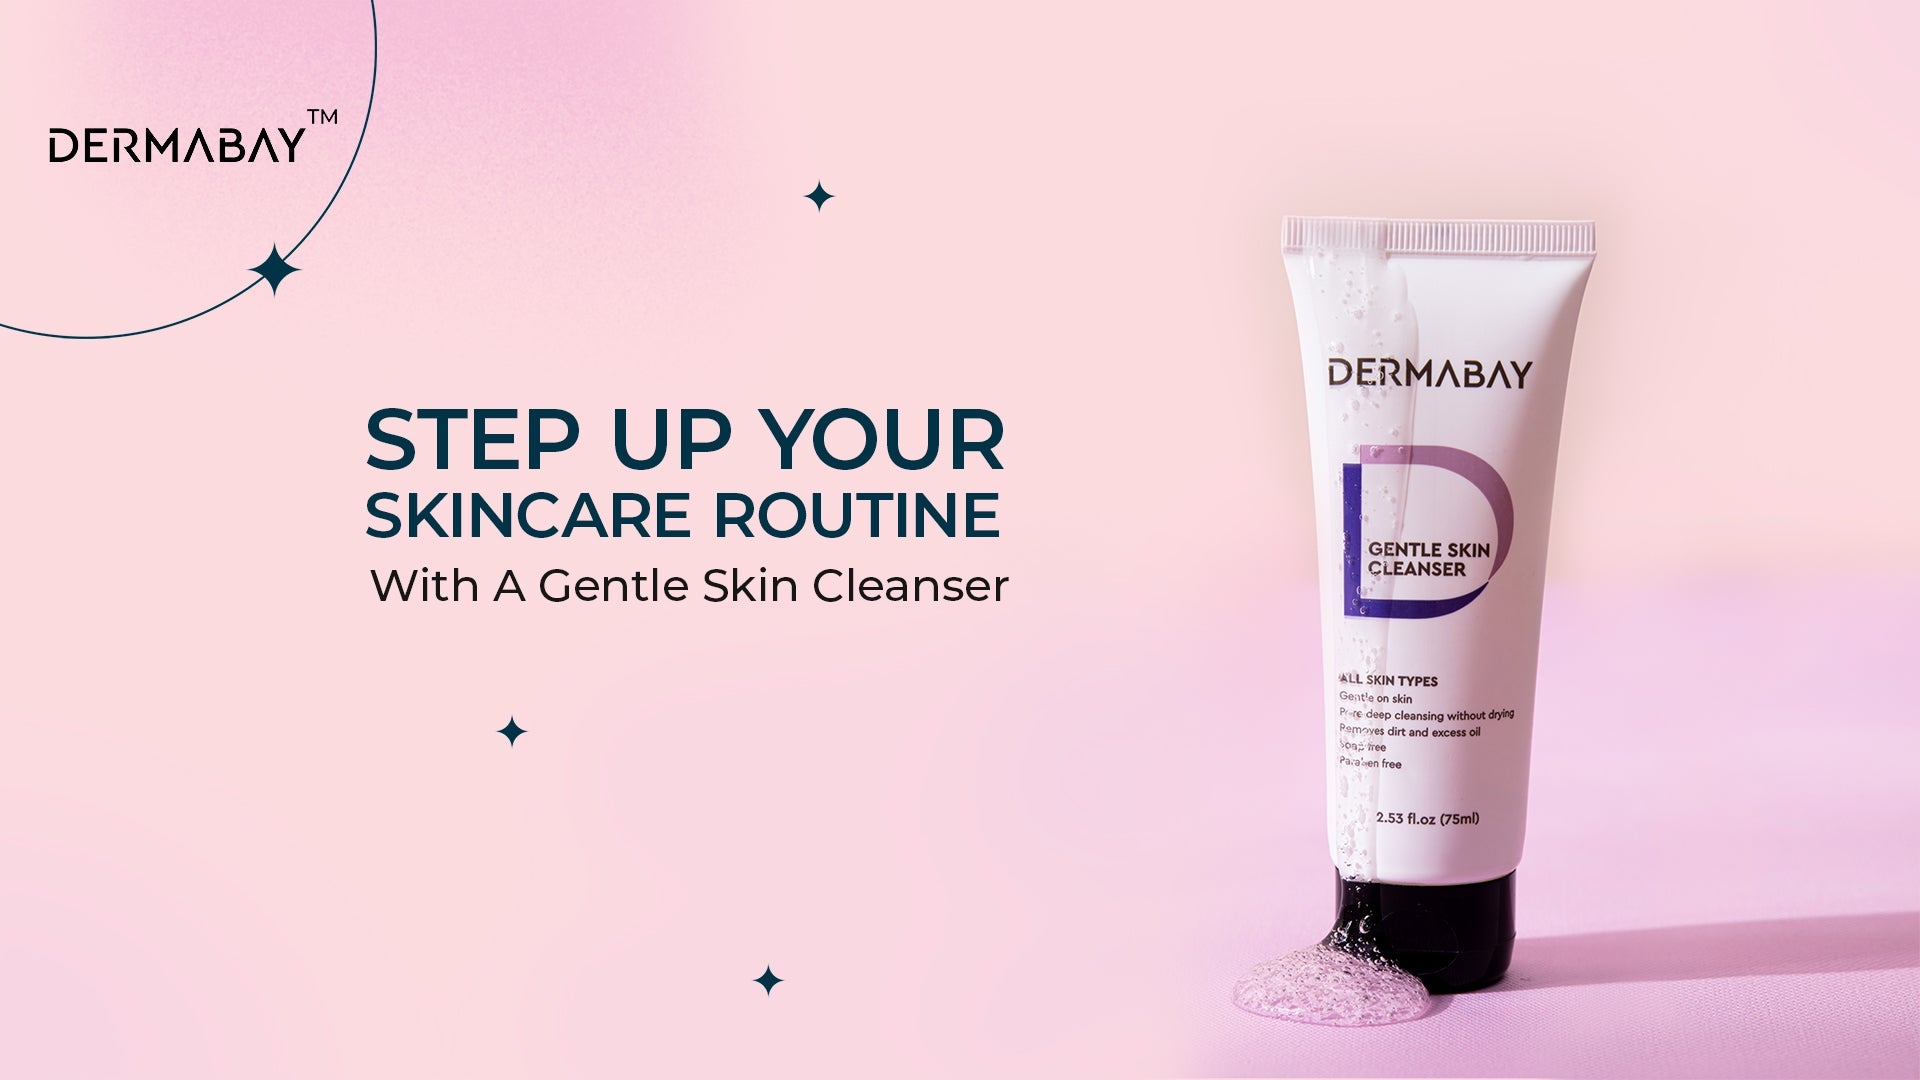 Step Up Your Skincare Routine With A Gentle Skin Cleanser - Dermabay